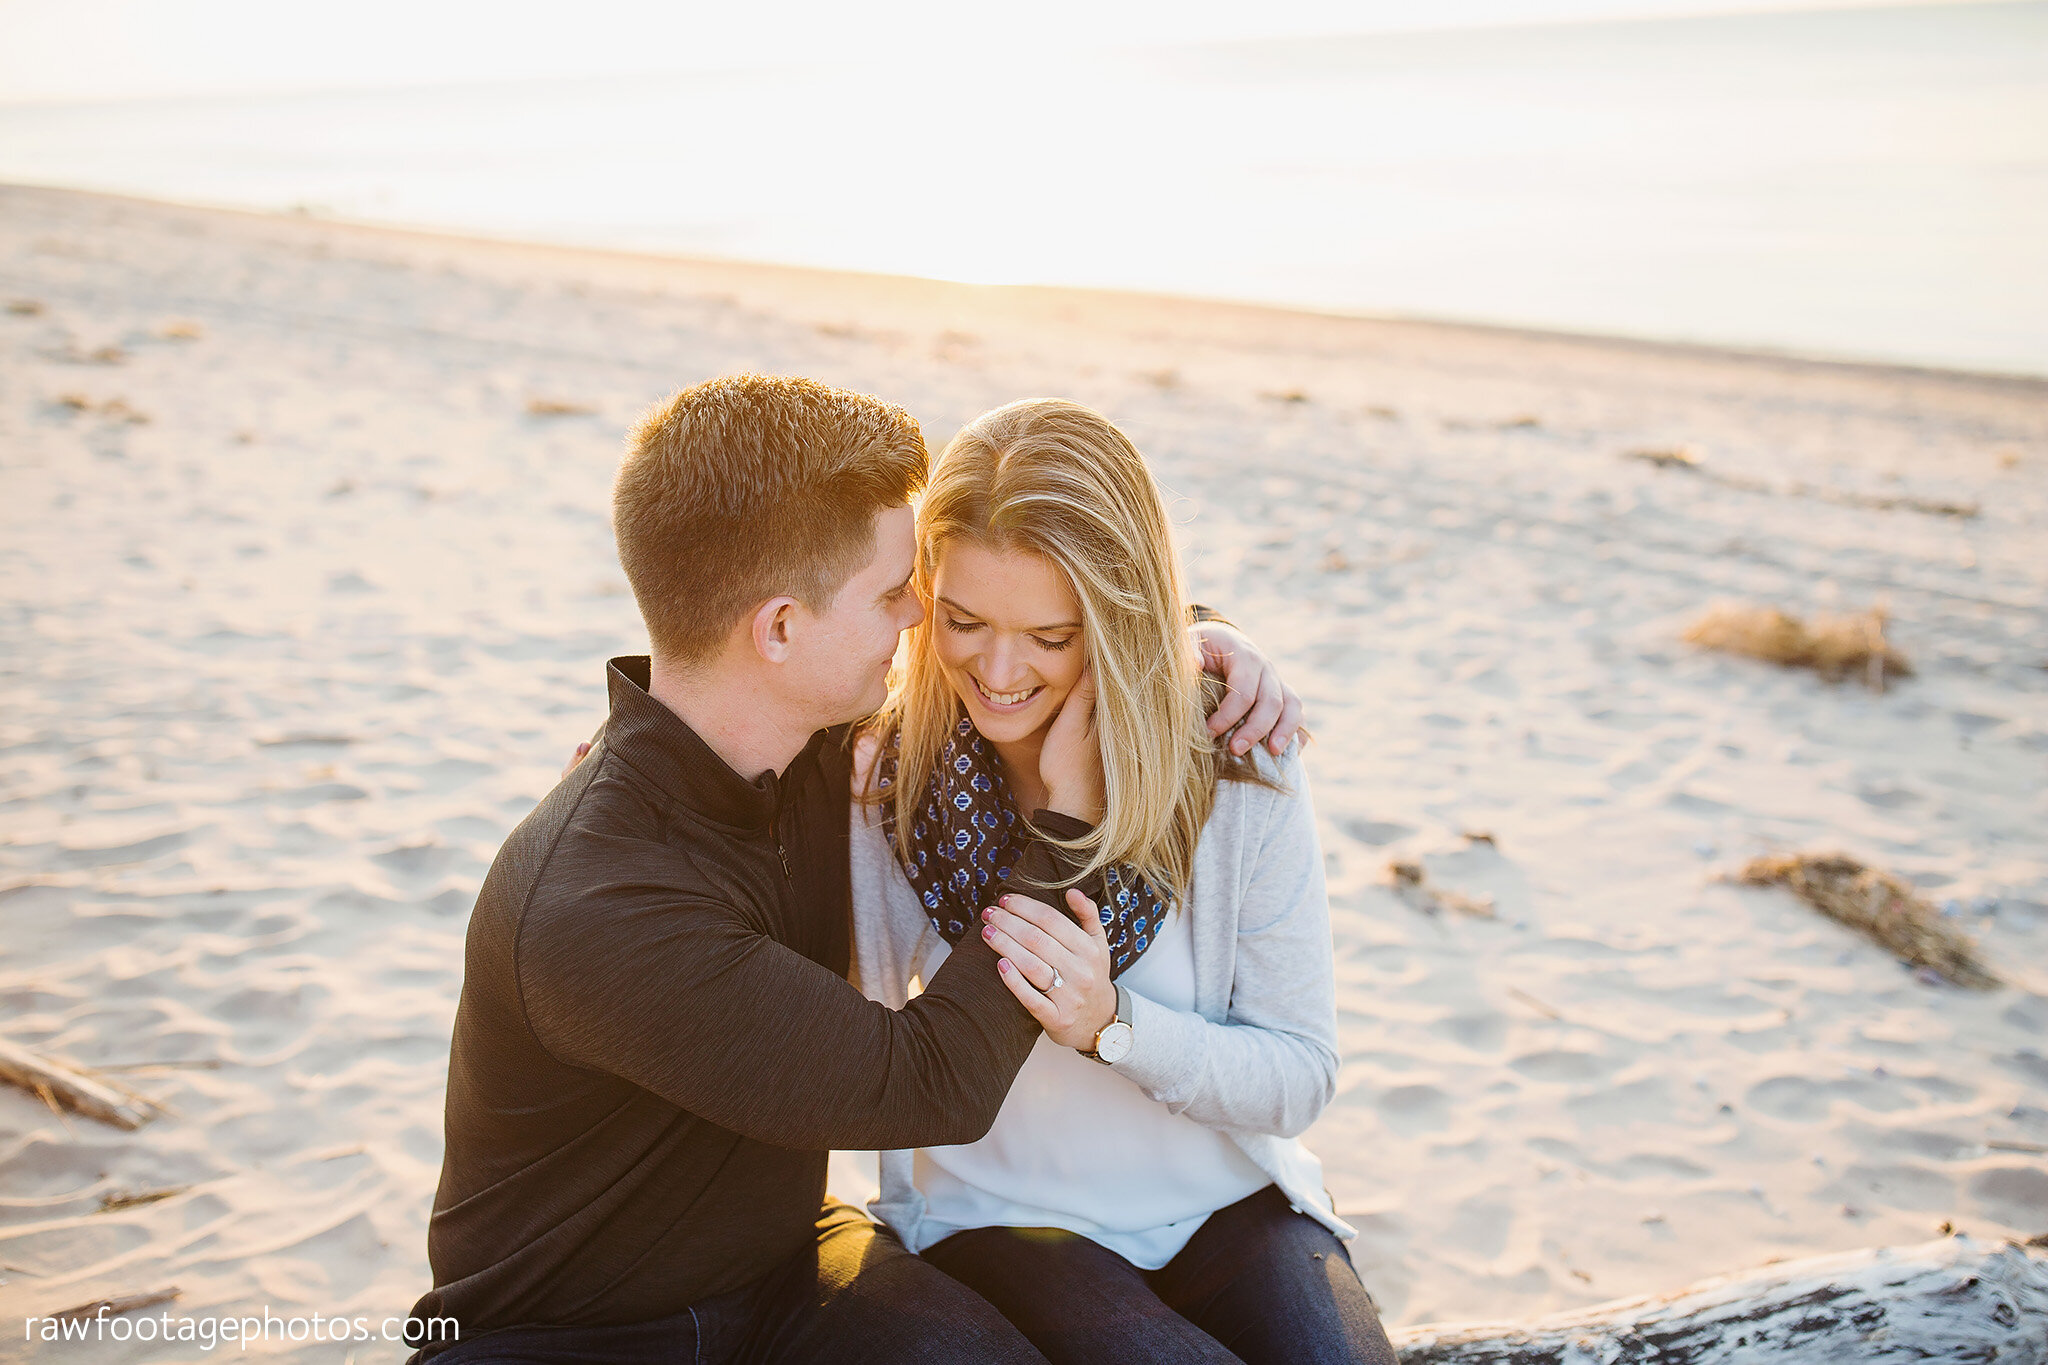 london_ontario_wedding_photographer-grand_bend_engagement_session-beach_engagement-sunset-forest-woods-raw_footage_photography023.jpg